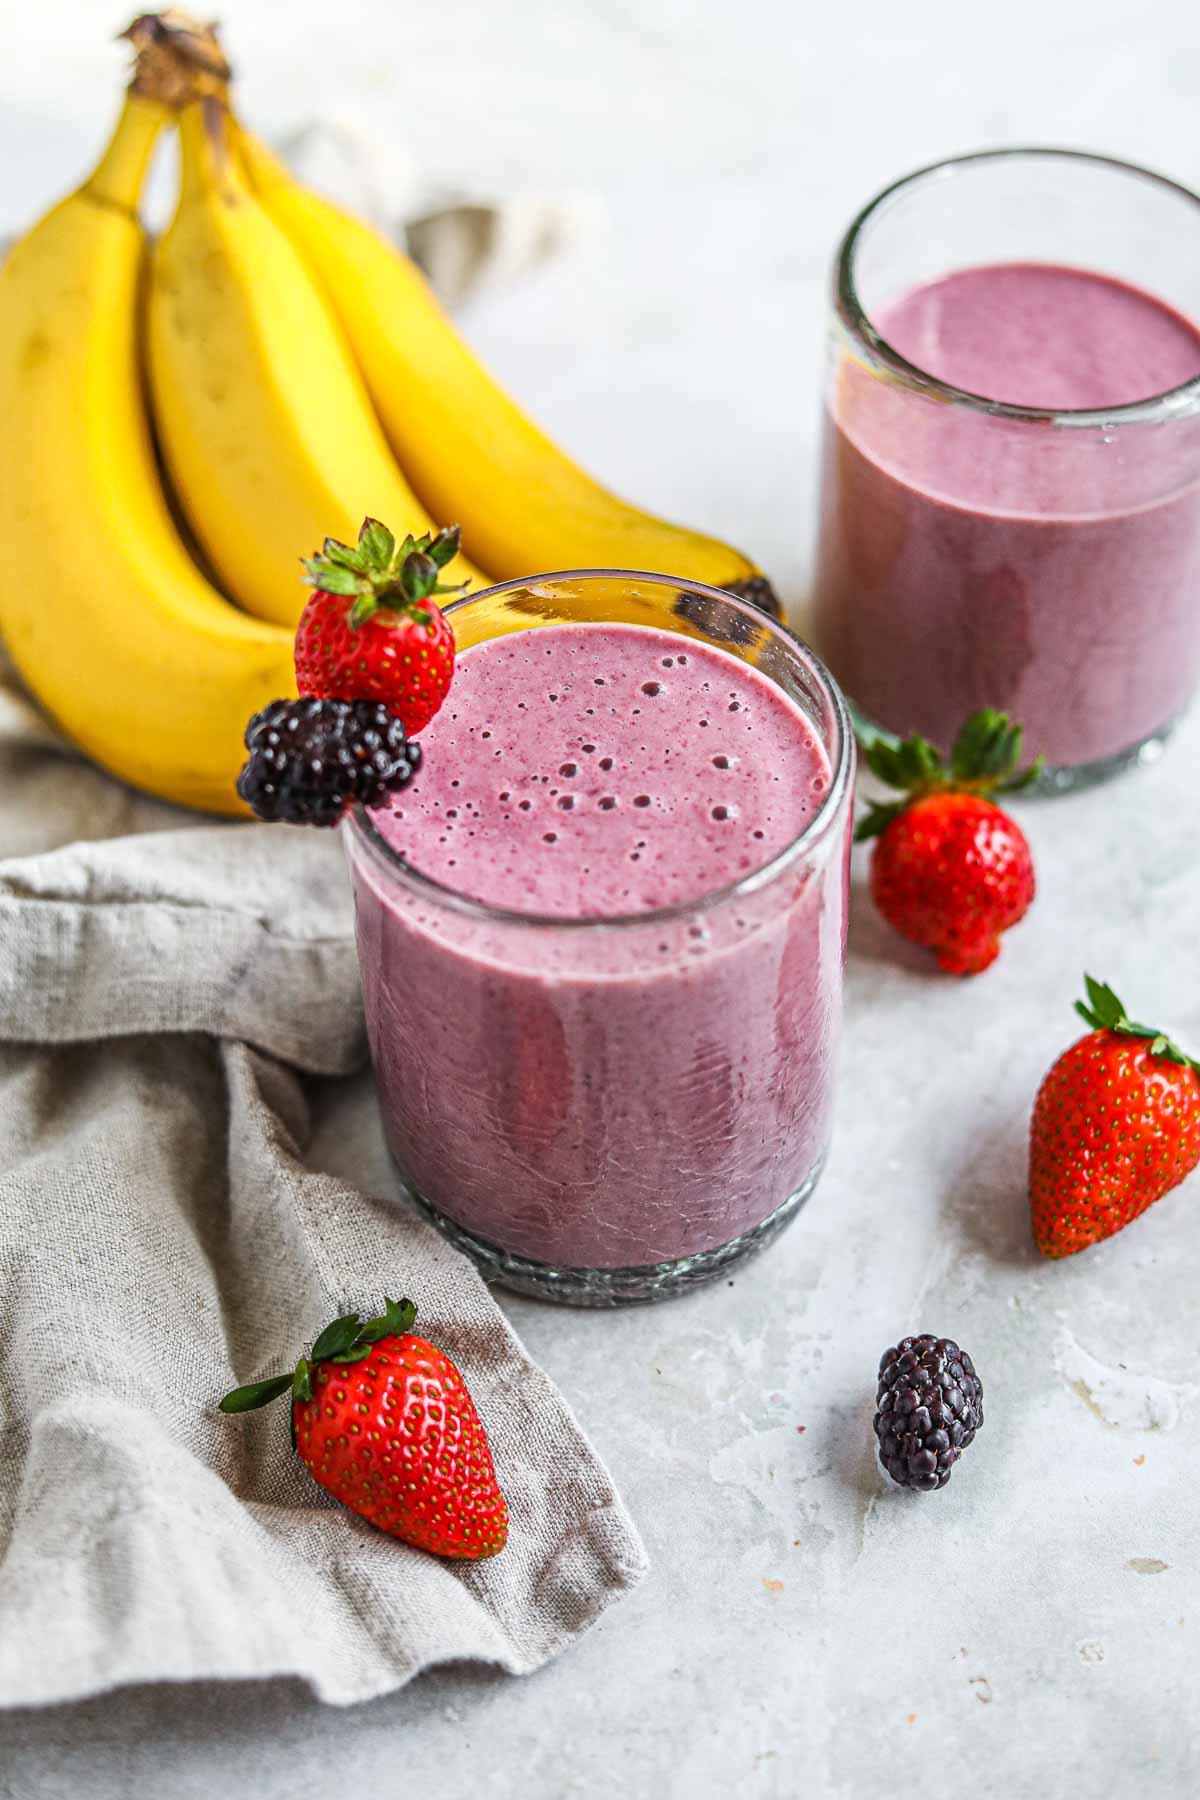 Purple blackberry strawberry banana smoothie in a glass garnished with fresh strawberries and blackberries.